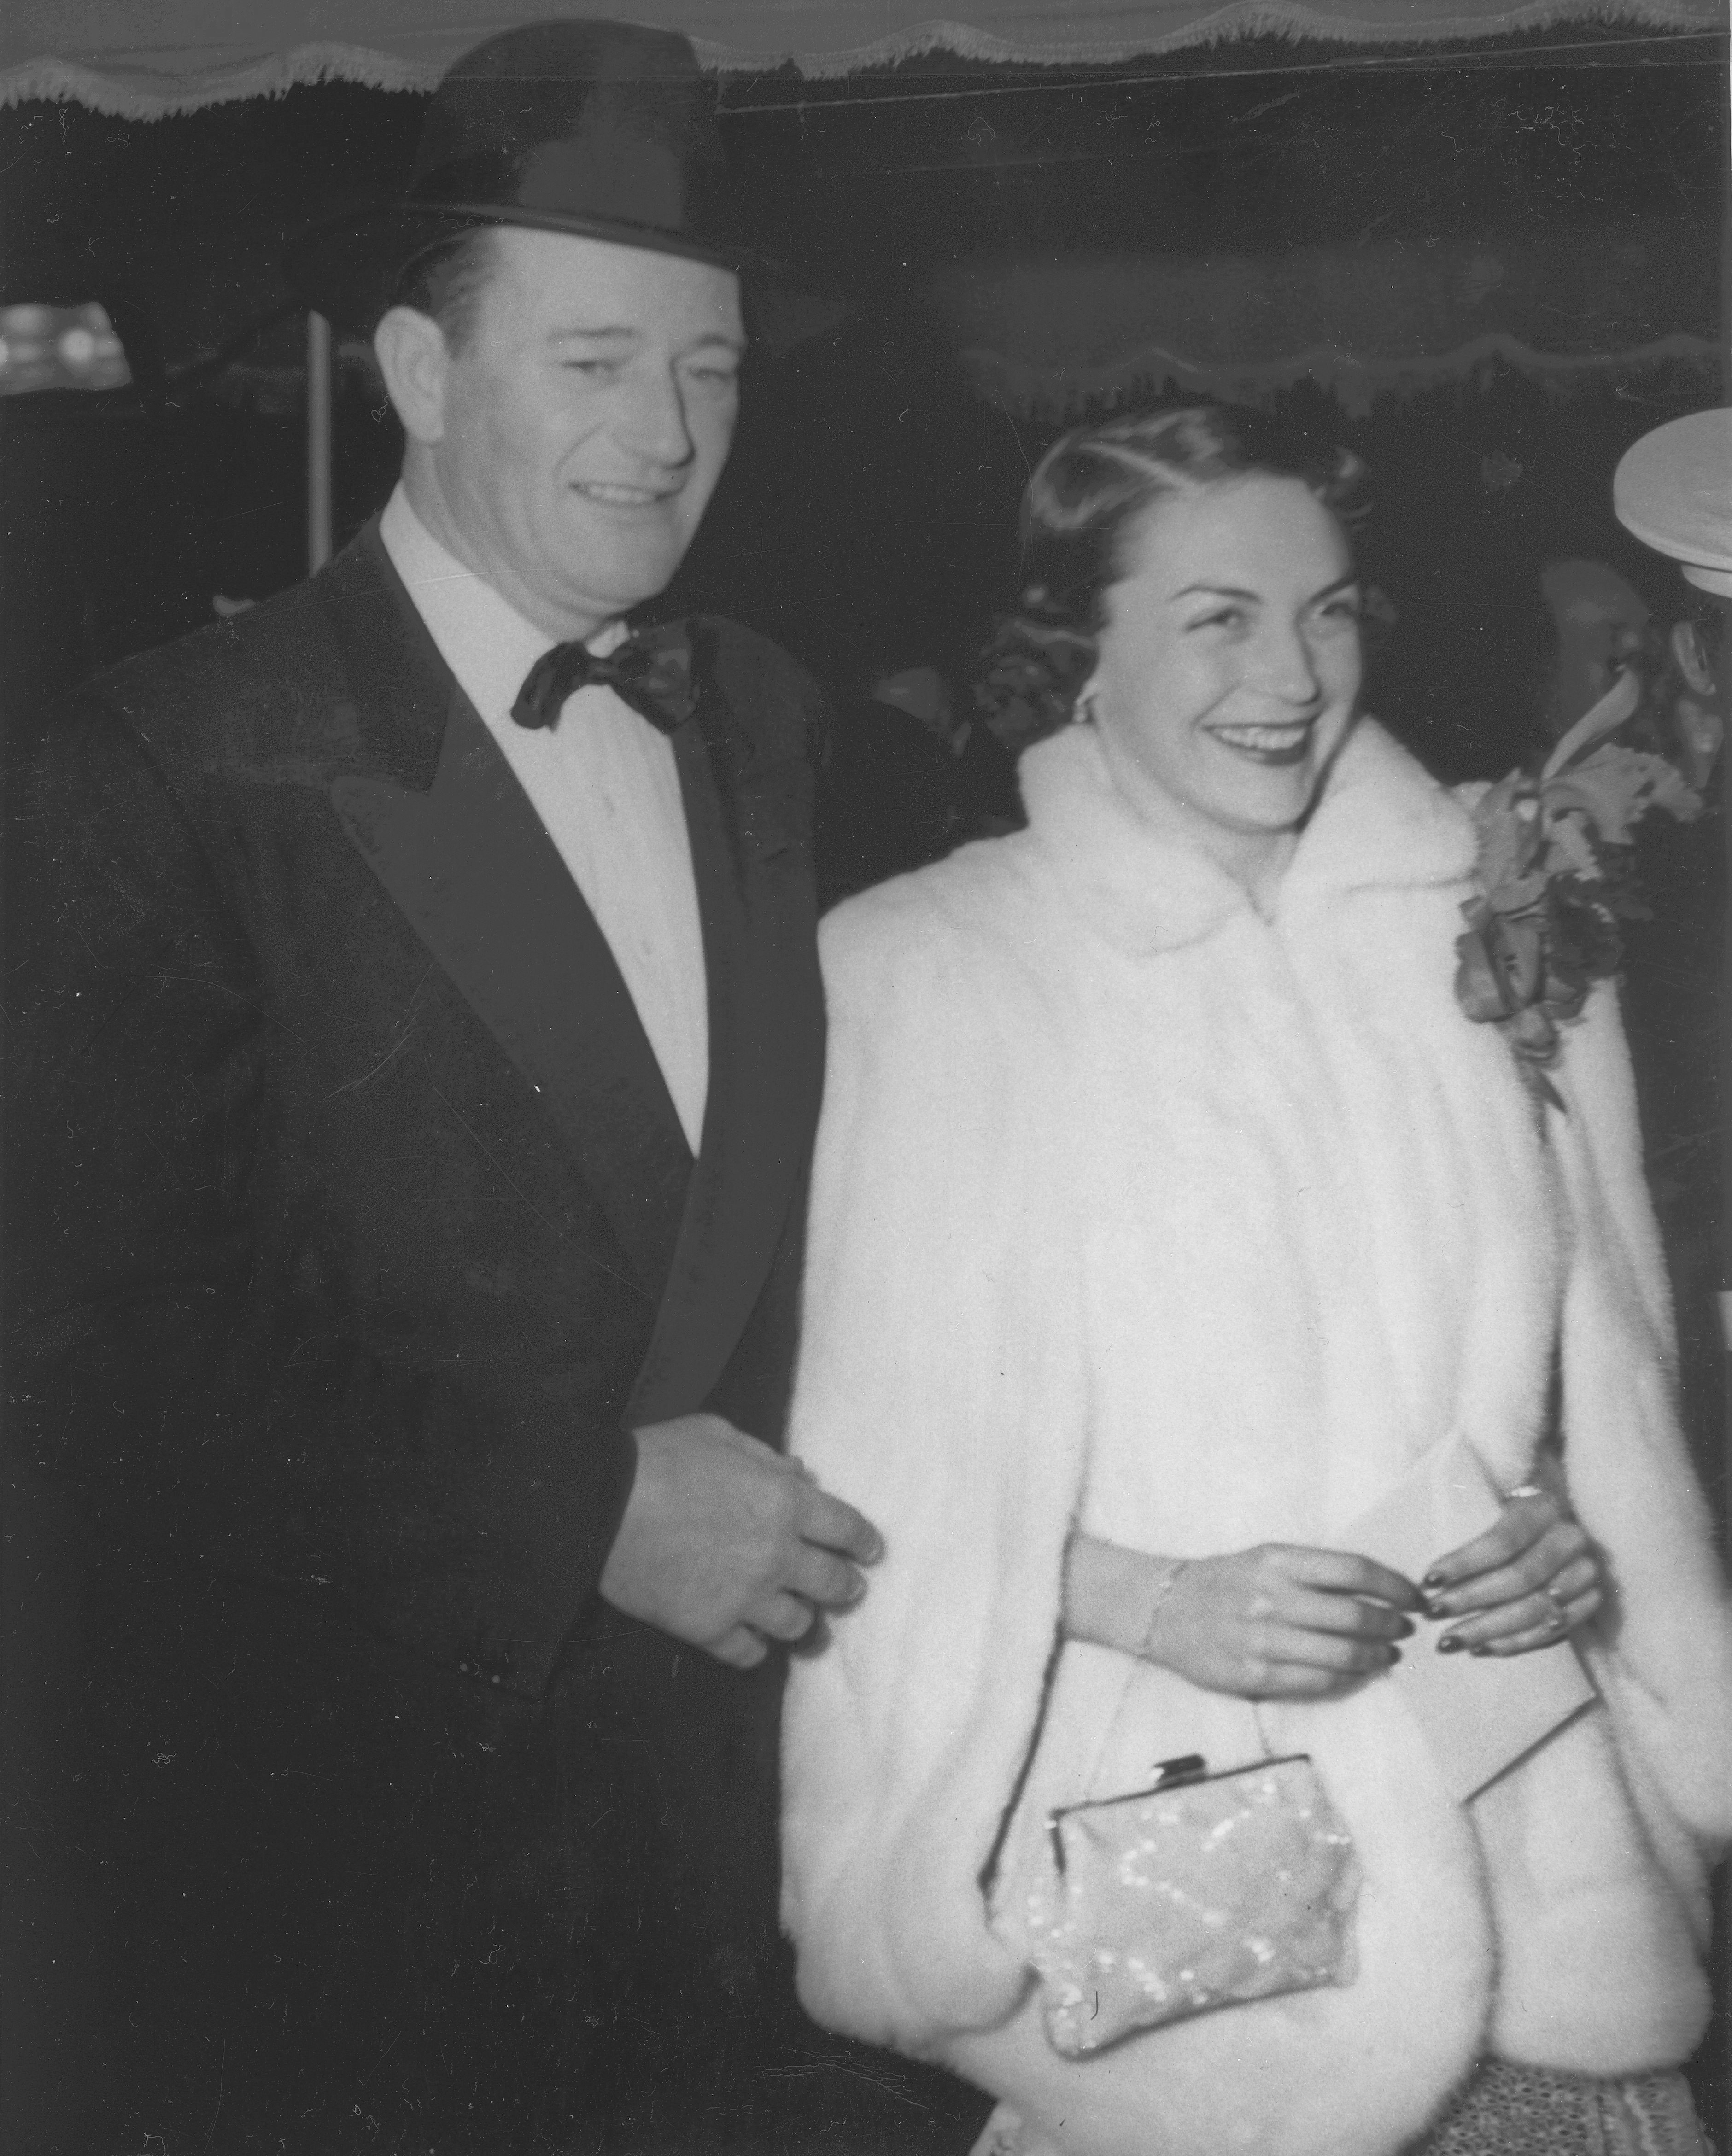 John Wayne and his wife, Esperanza Baur arrive at the "Sands of Iwo Jima" premiere. | Source: Wikimedia Commons By USMC Archives, CC BY 2.0